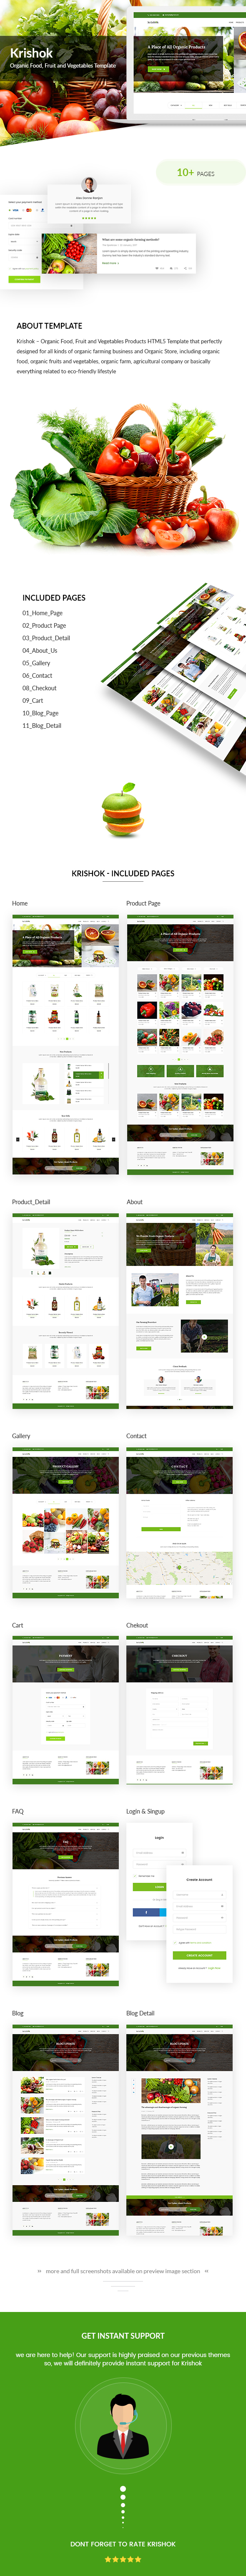 agriculture Eco Products farming food store fruits and vegetables gardening healthy food html5 template nutrition organic